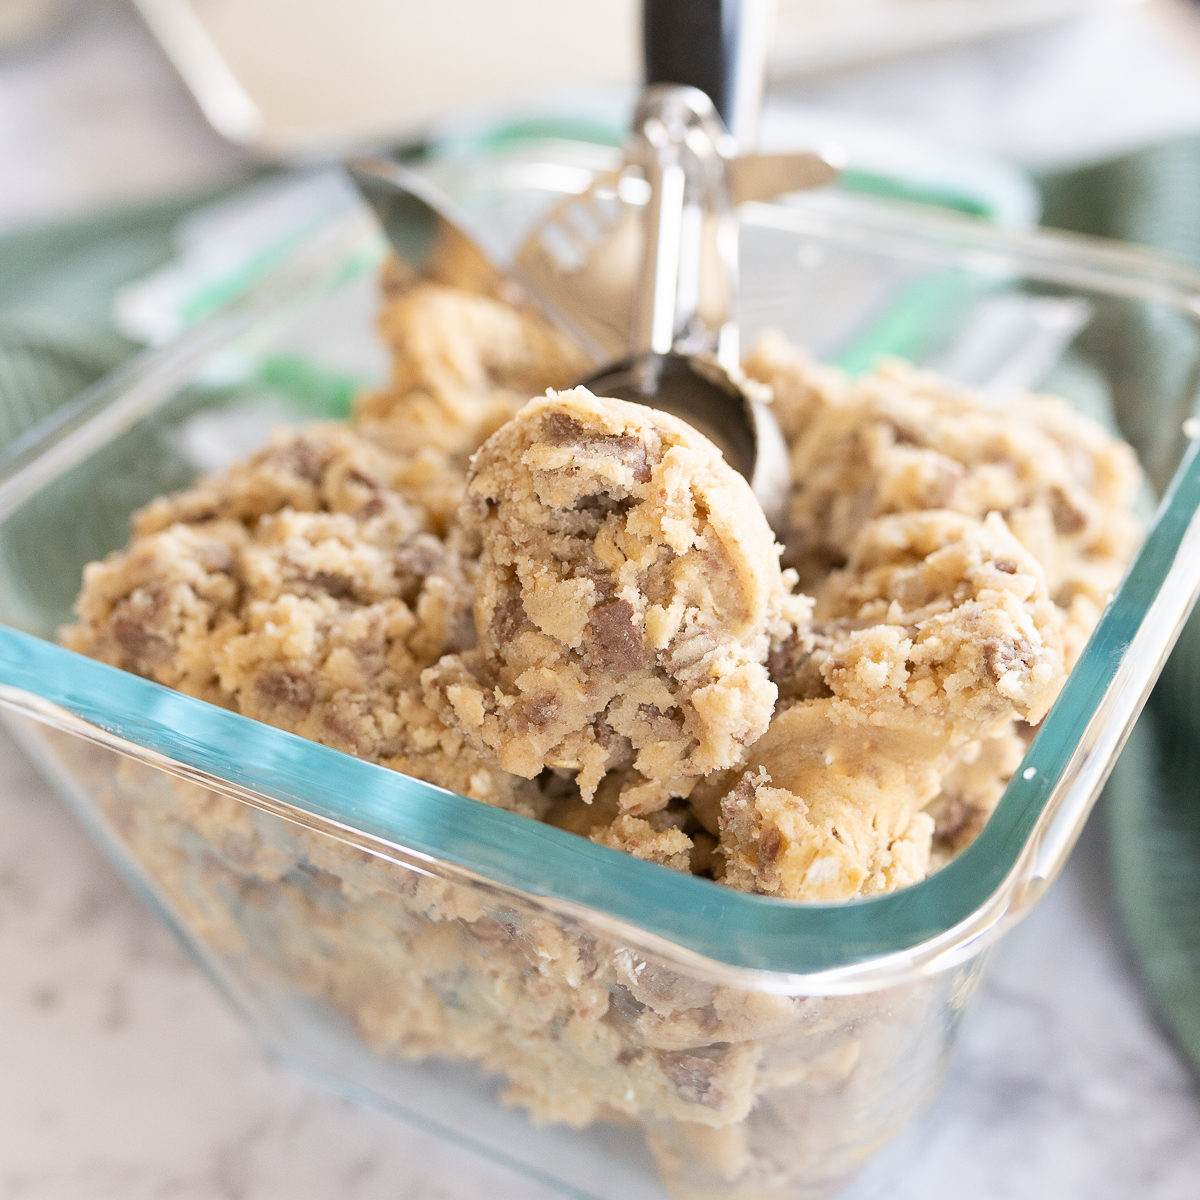 How to Store Cookie Dough